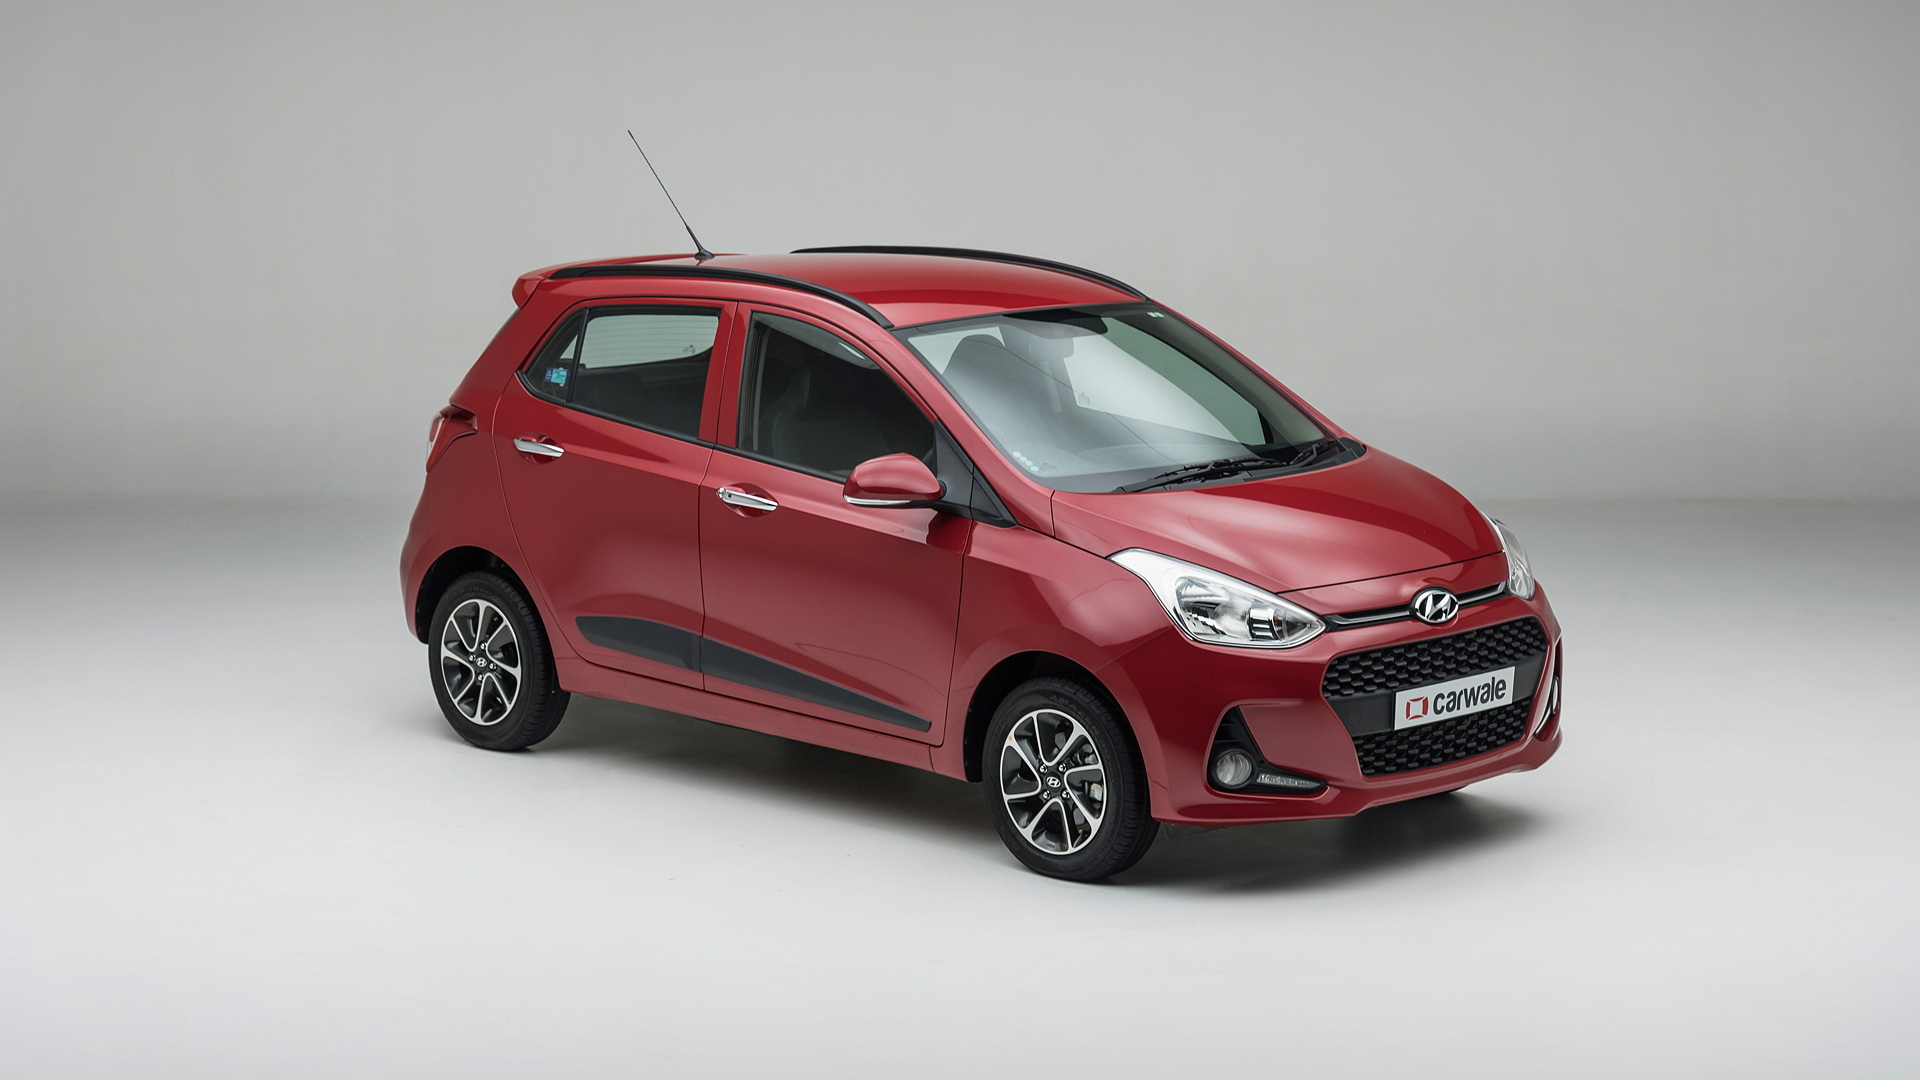 Hyundai Grand i10 Era 1.2 Kappa VTVT in India - Features, Specs and Reviews CarWale